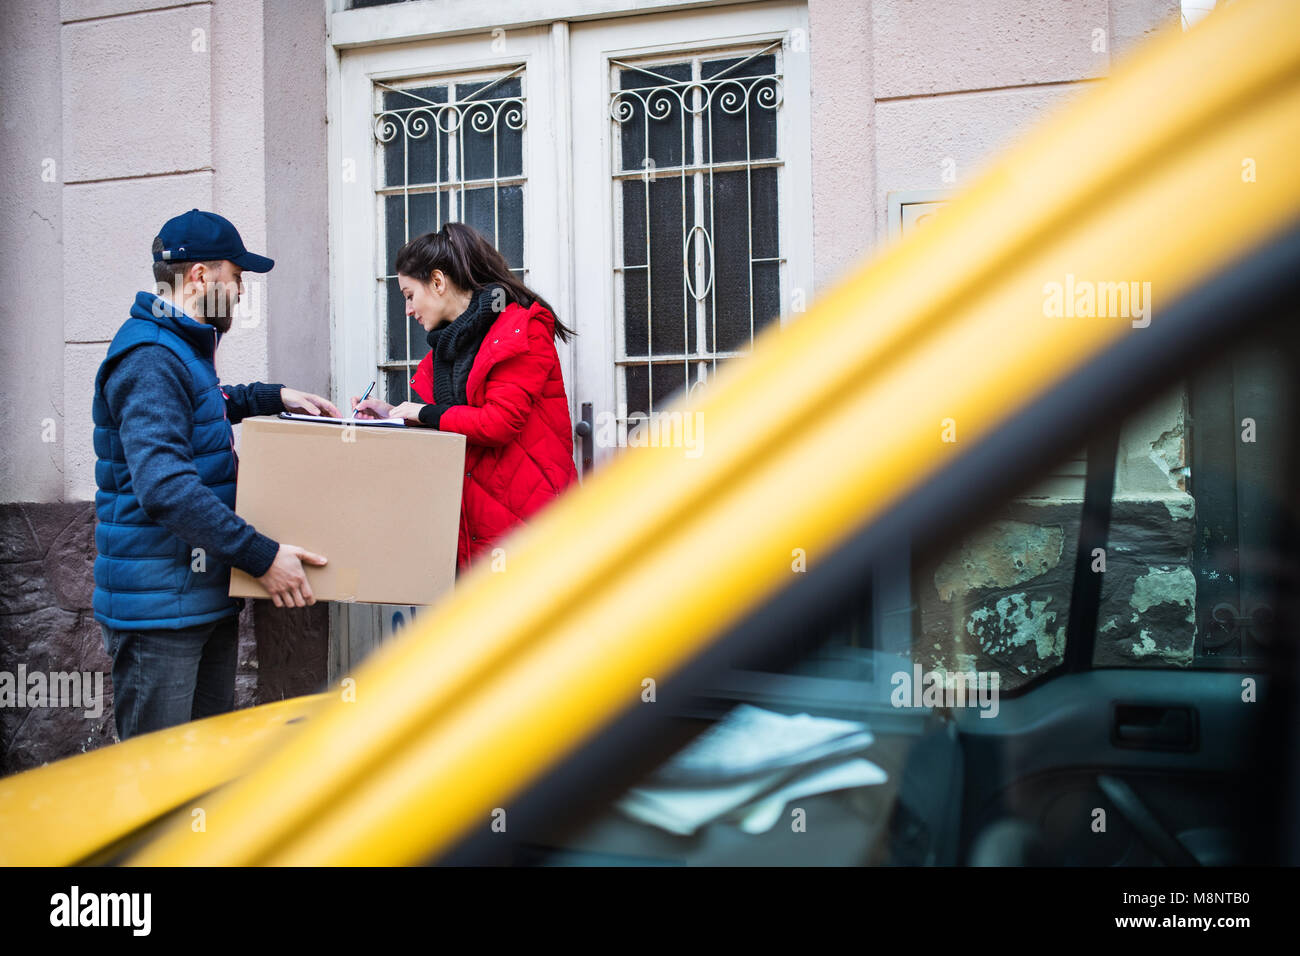 Woman receiving parcel from delivery man at the door. Stock Photo